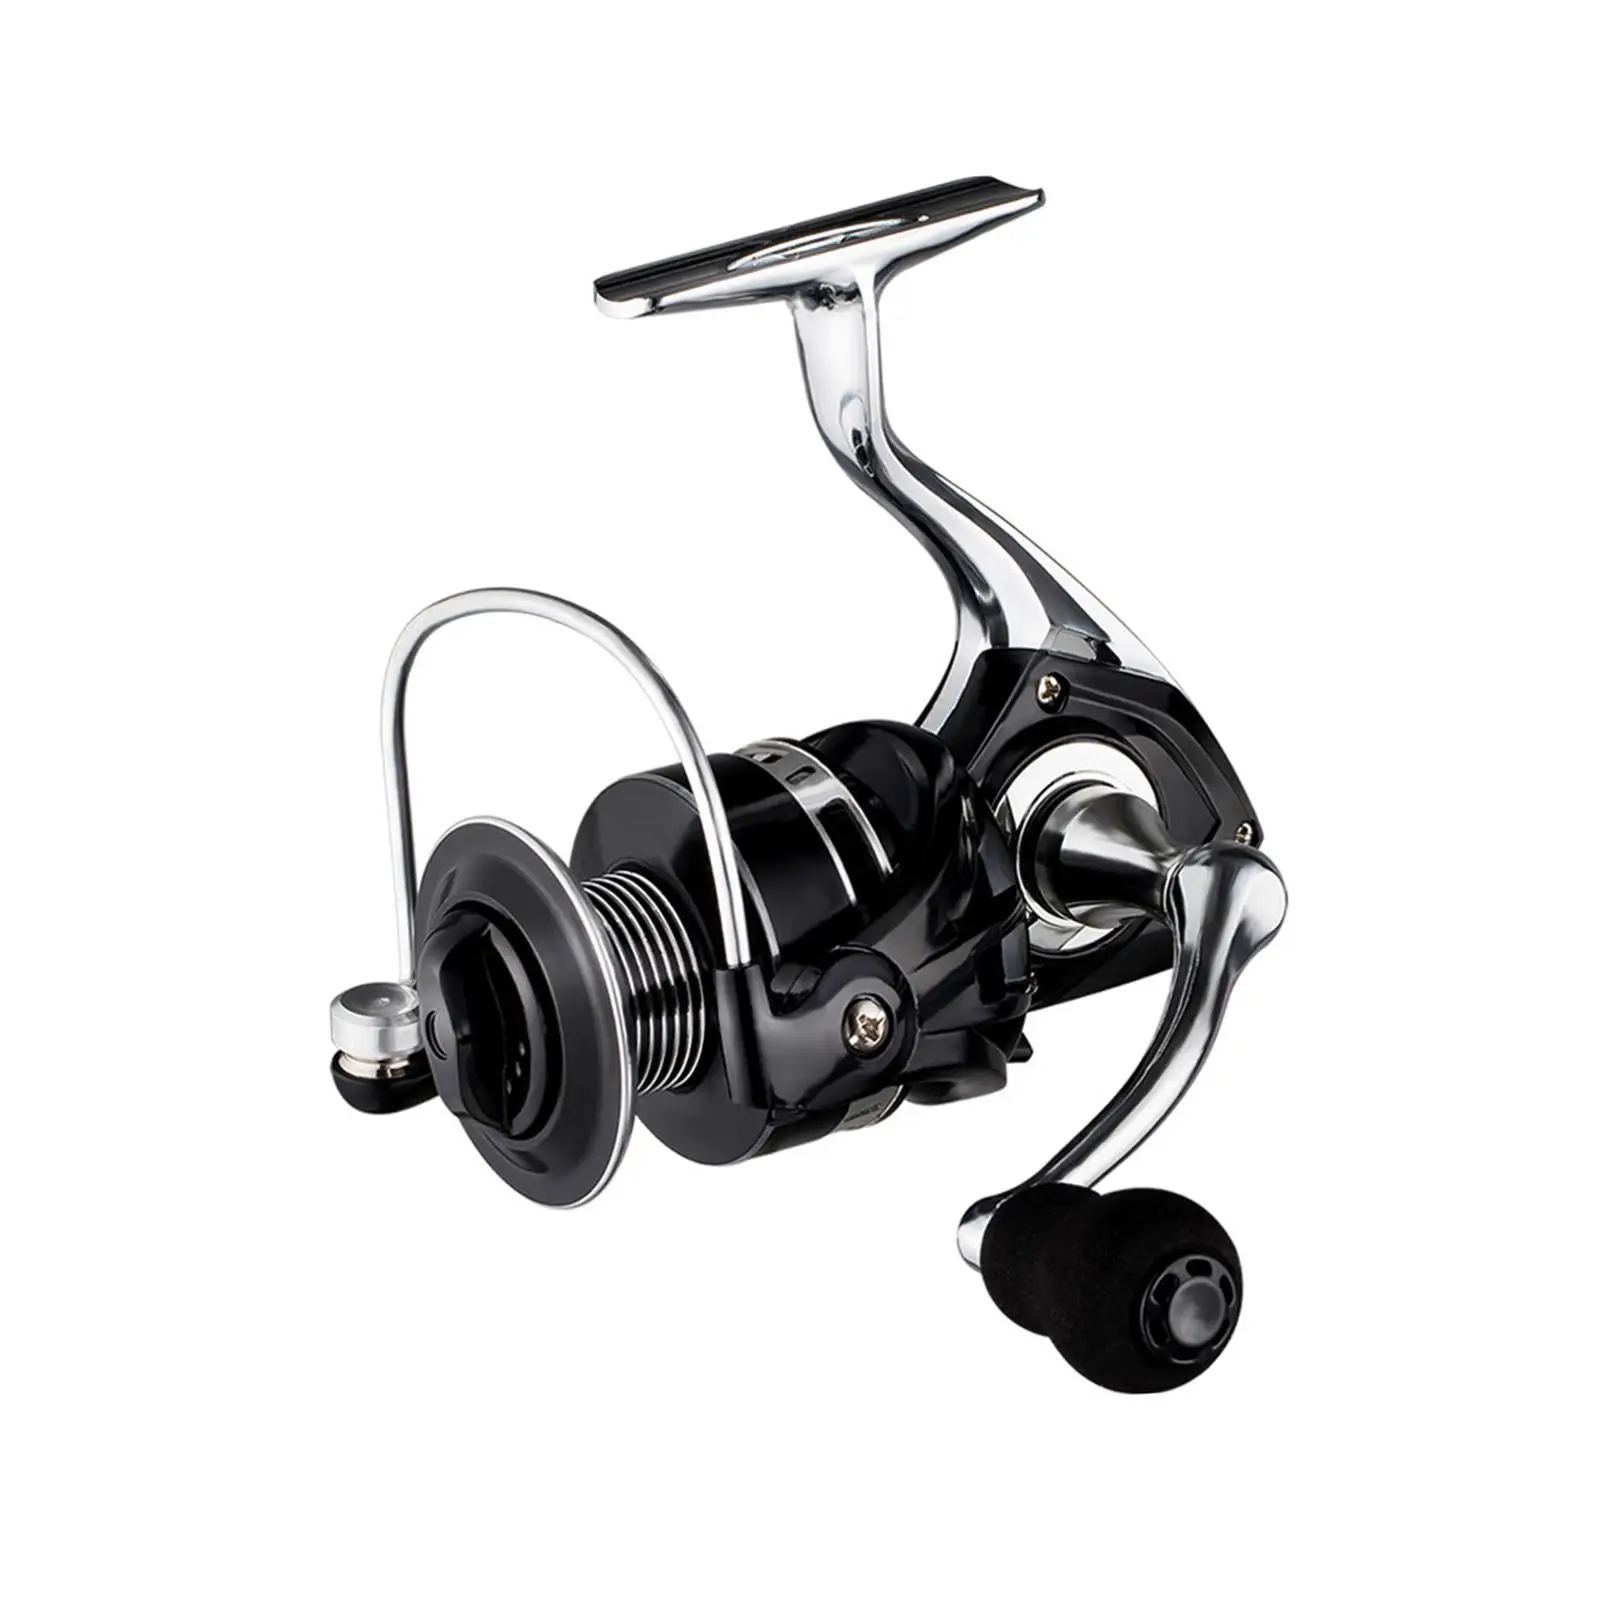 Reel Left Right Handle Casting Reels Fishing Reel for Outdoor Accessories